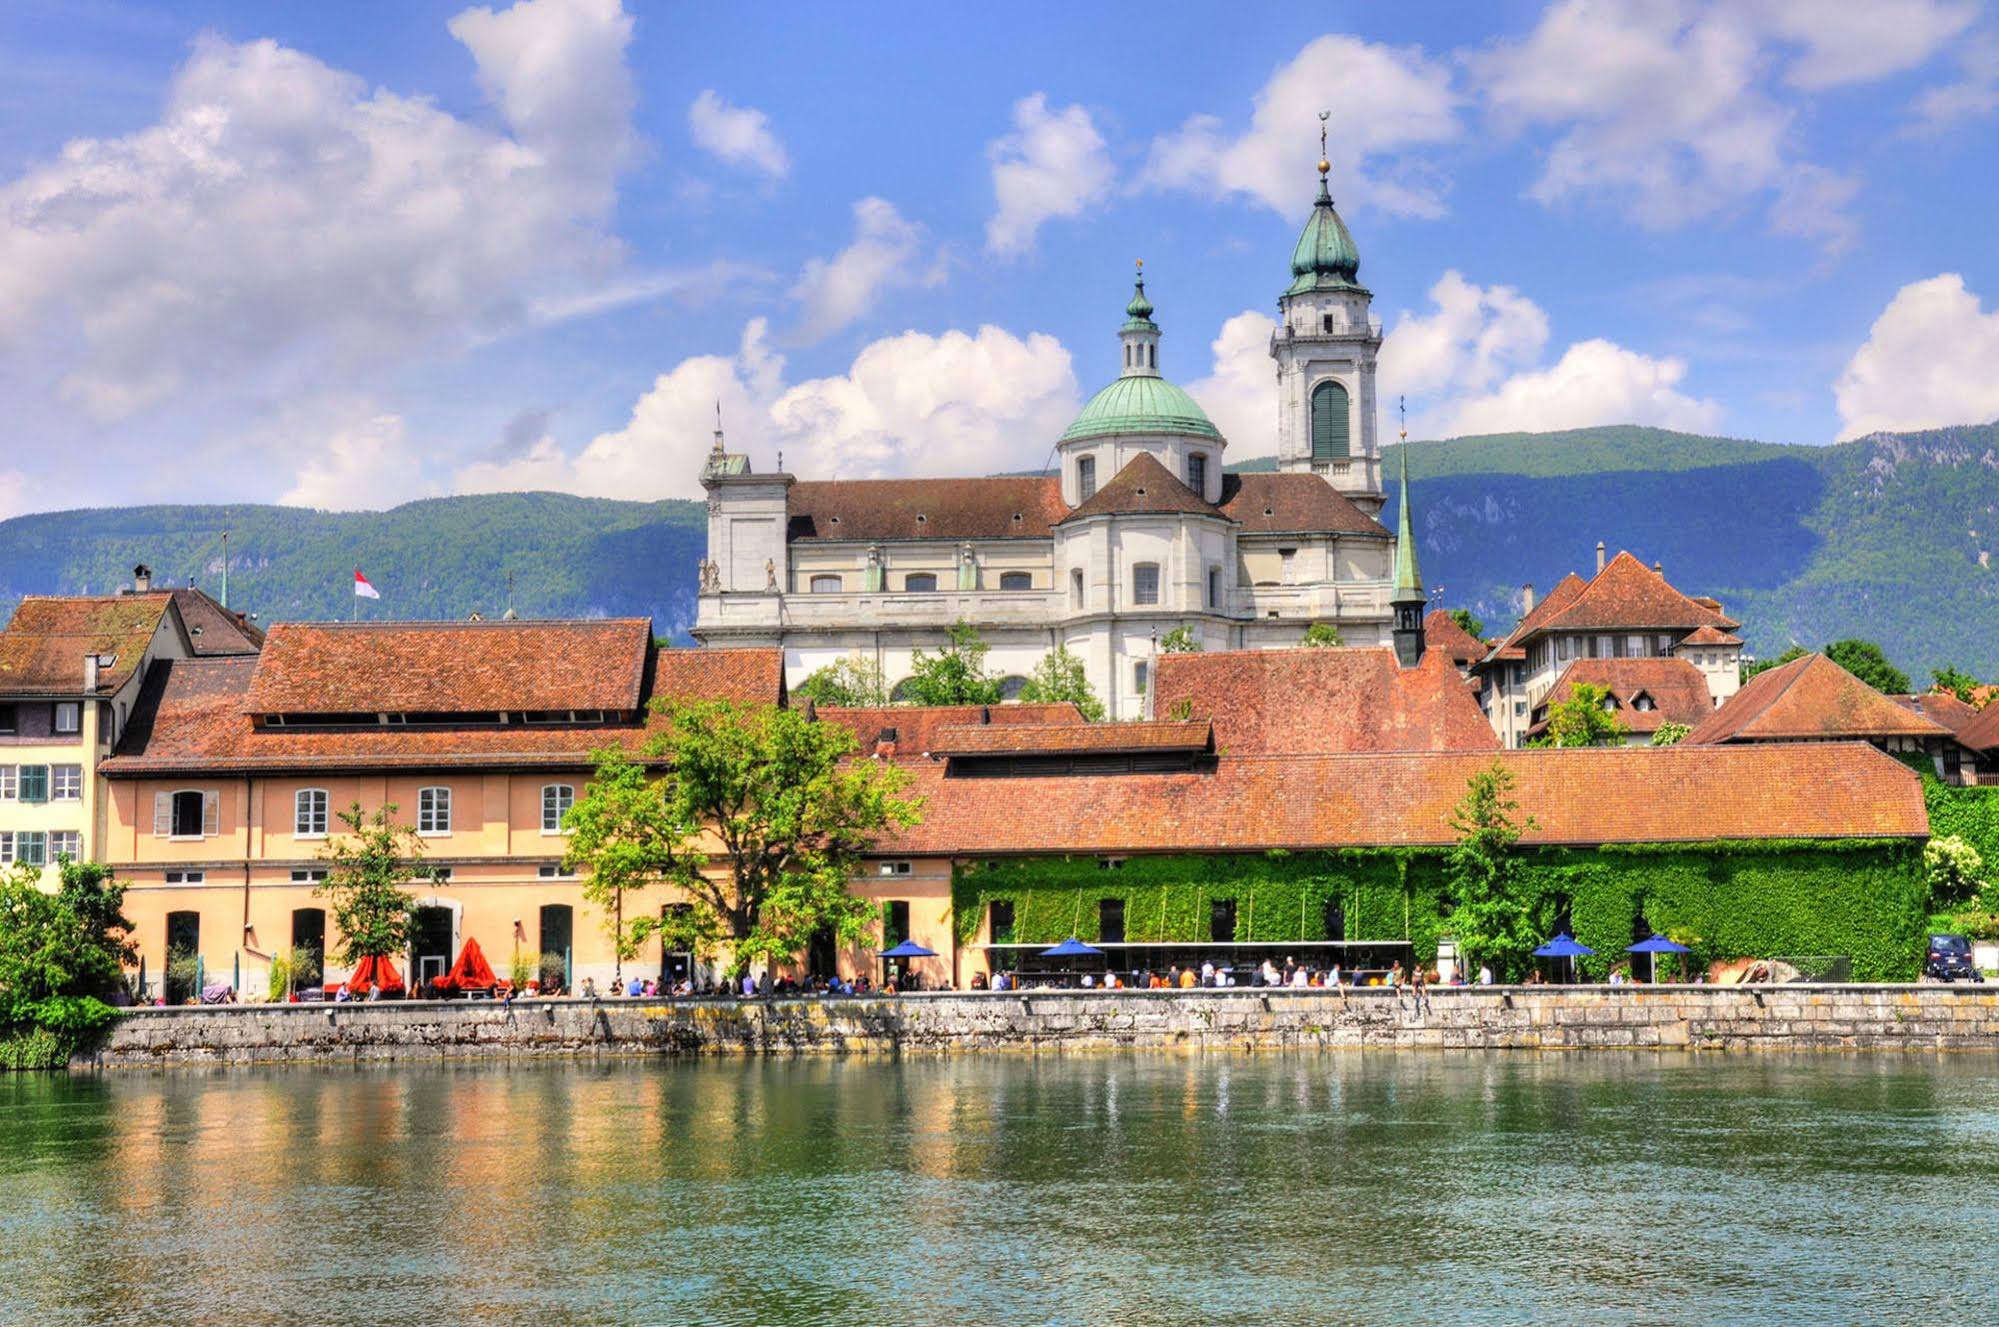 Solothurn - Tourist attractions by Switzerland Tourism - Issuu